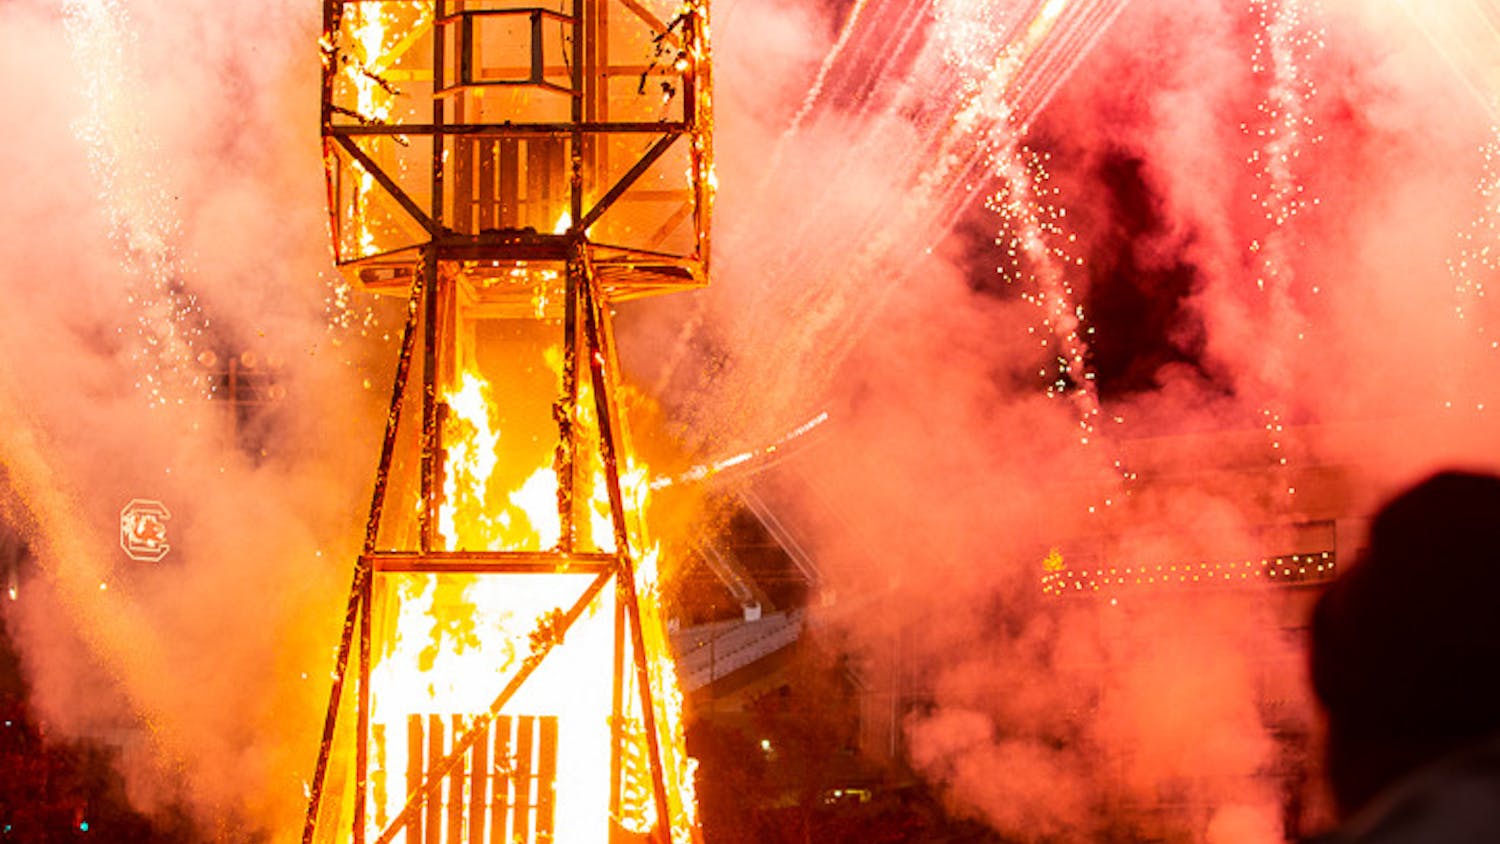 The Clemson Tiger statue was set ablaze during the Tiger Burning ceremony and within five minutes was nearly entirely burnt. The firework show rages on in the background as the crowd cheers.